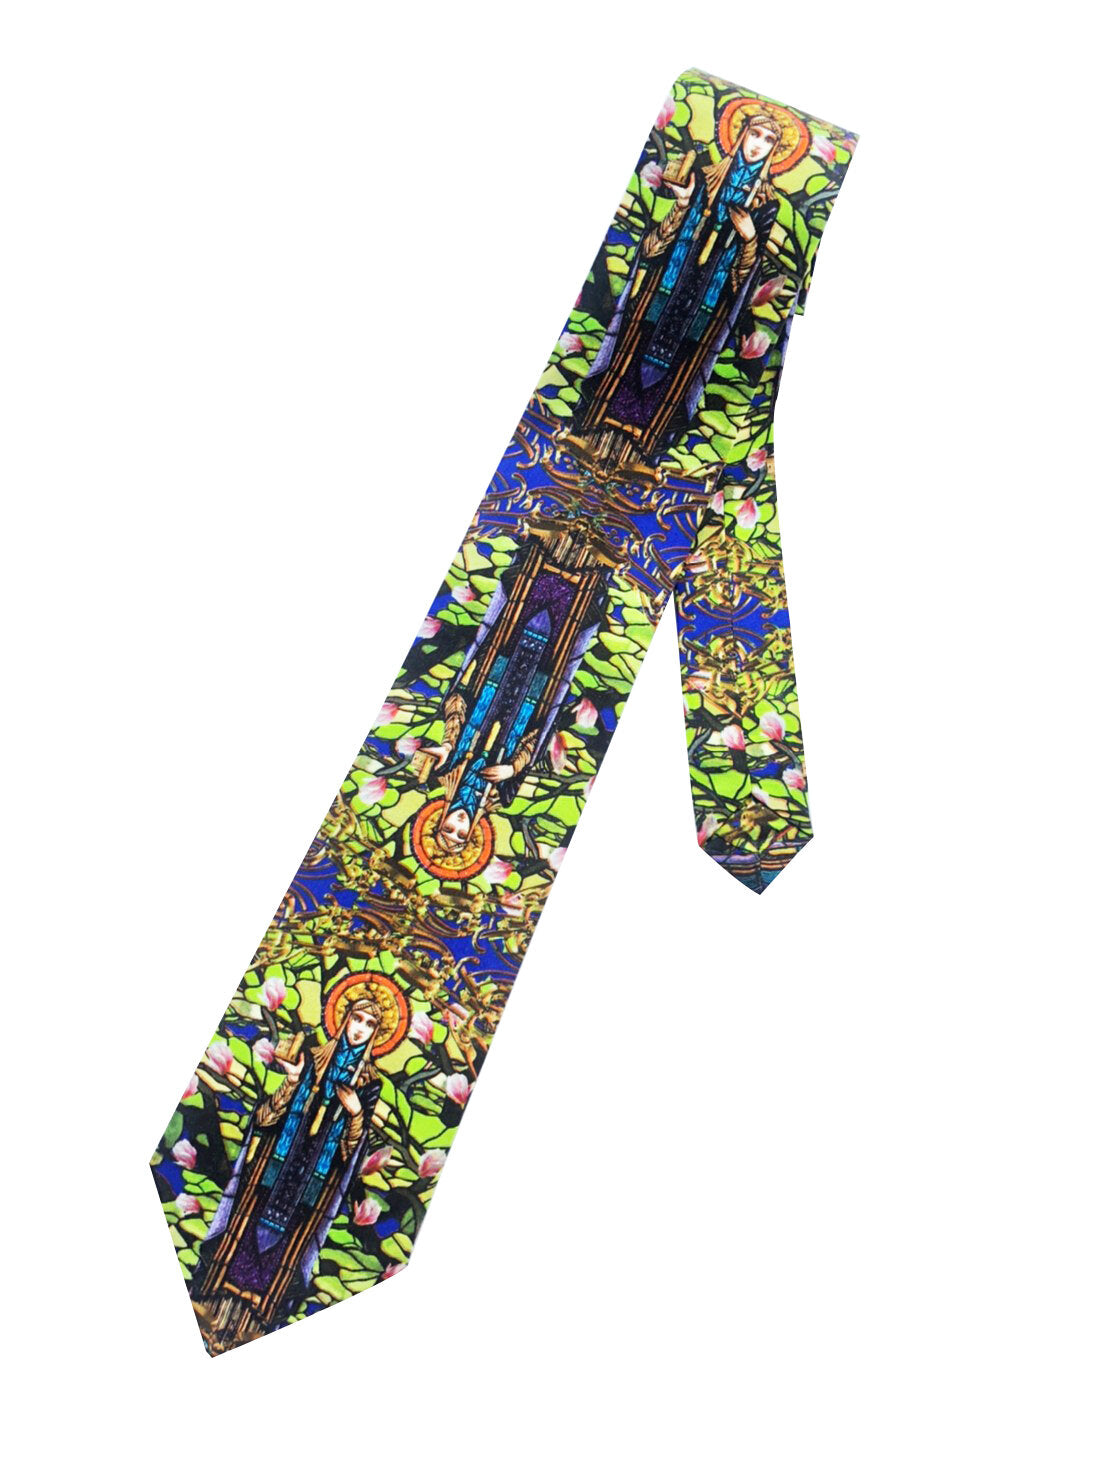 St. Brigid Tie - Sold out - Made to order